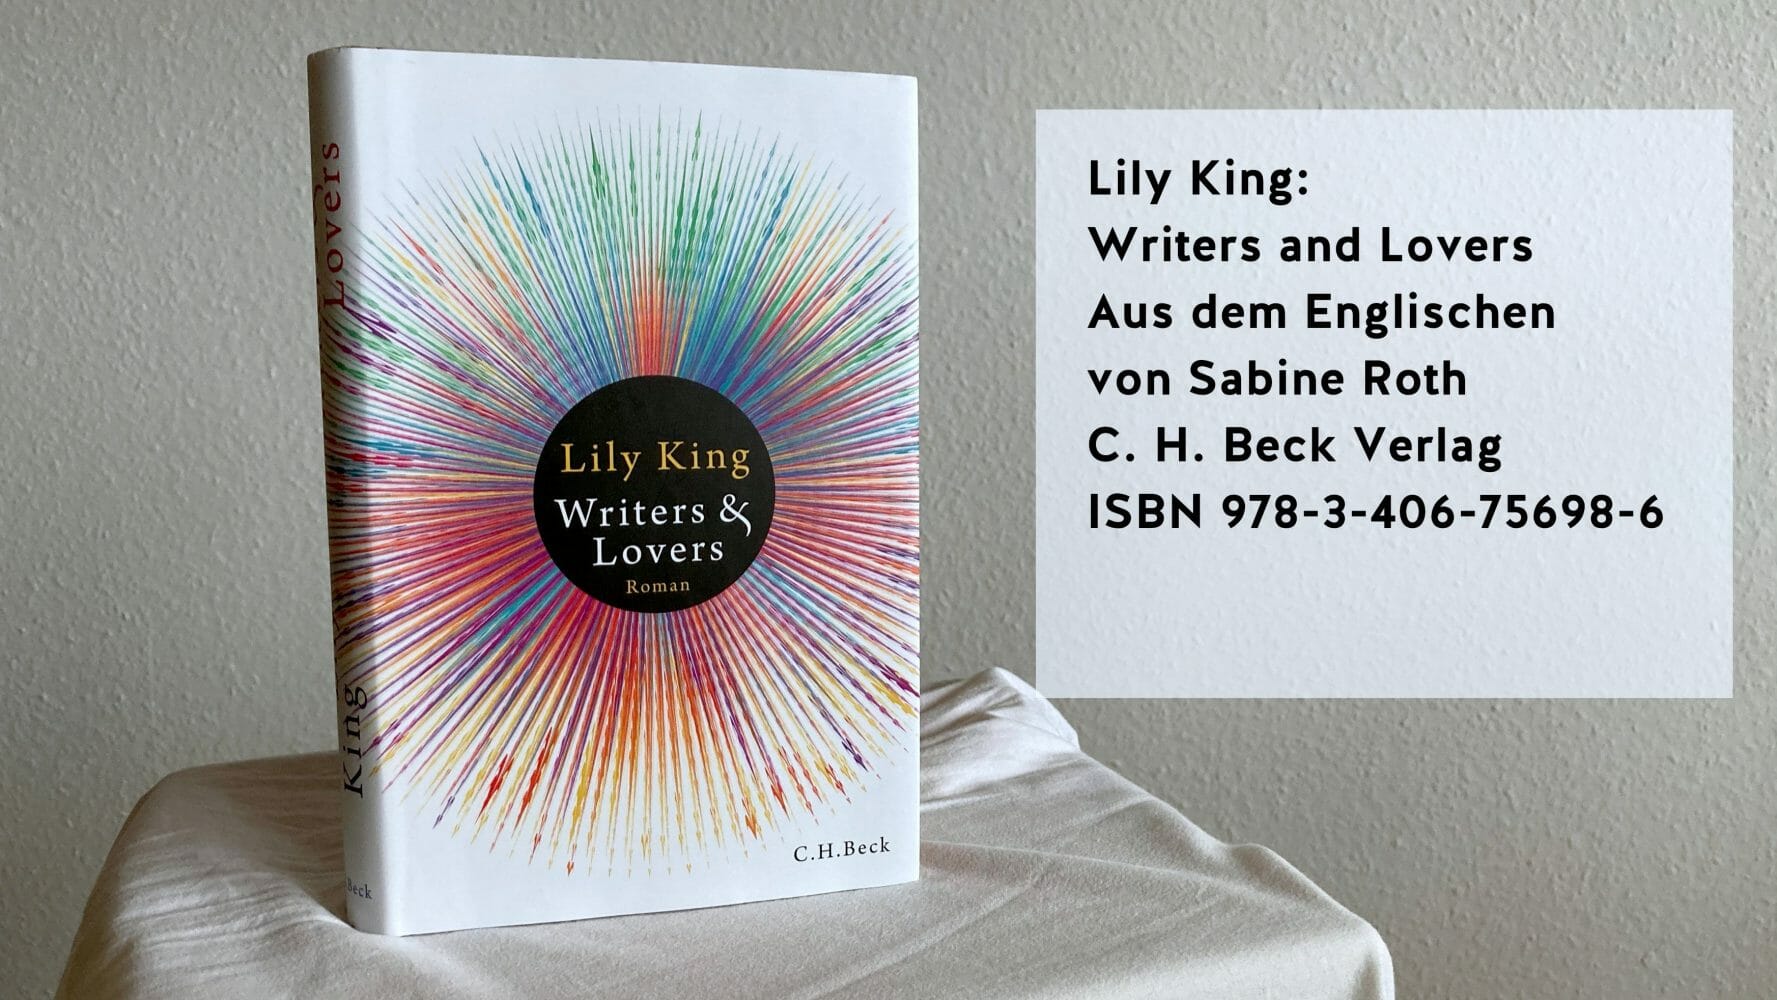 Lily King: Writers and Lovers